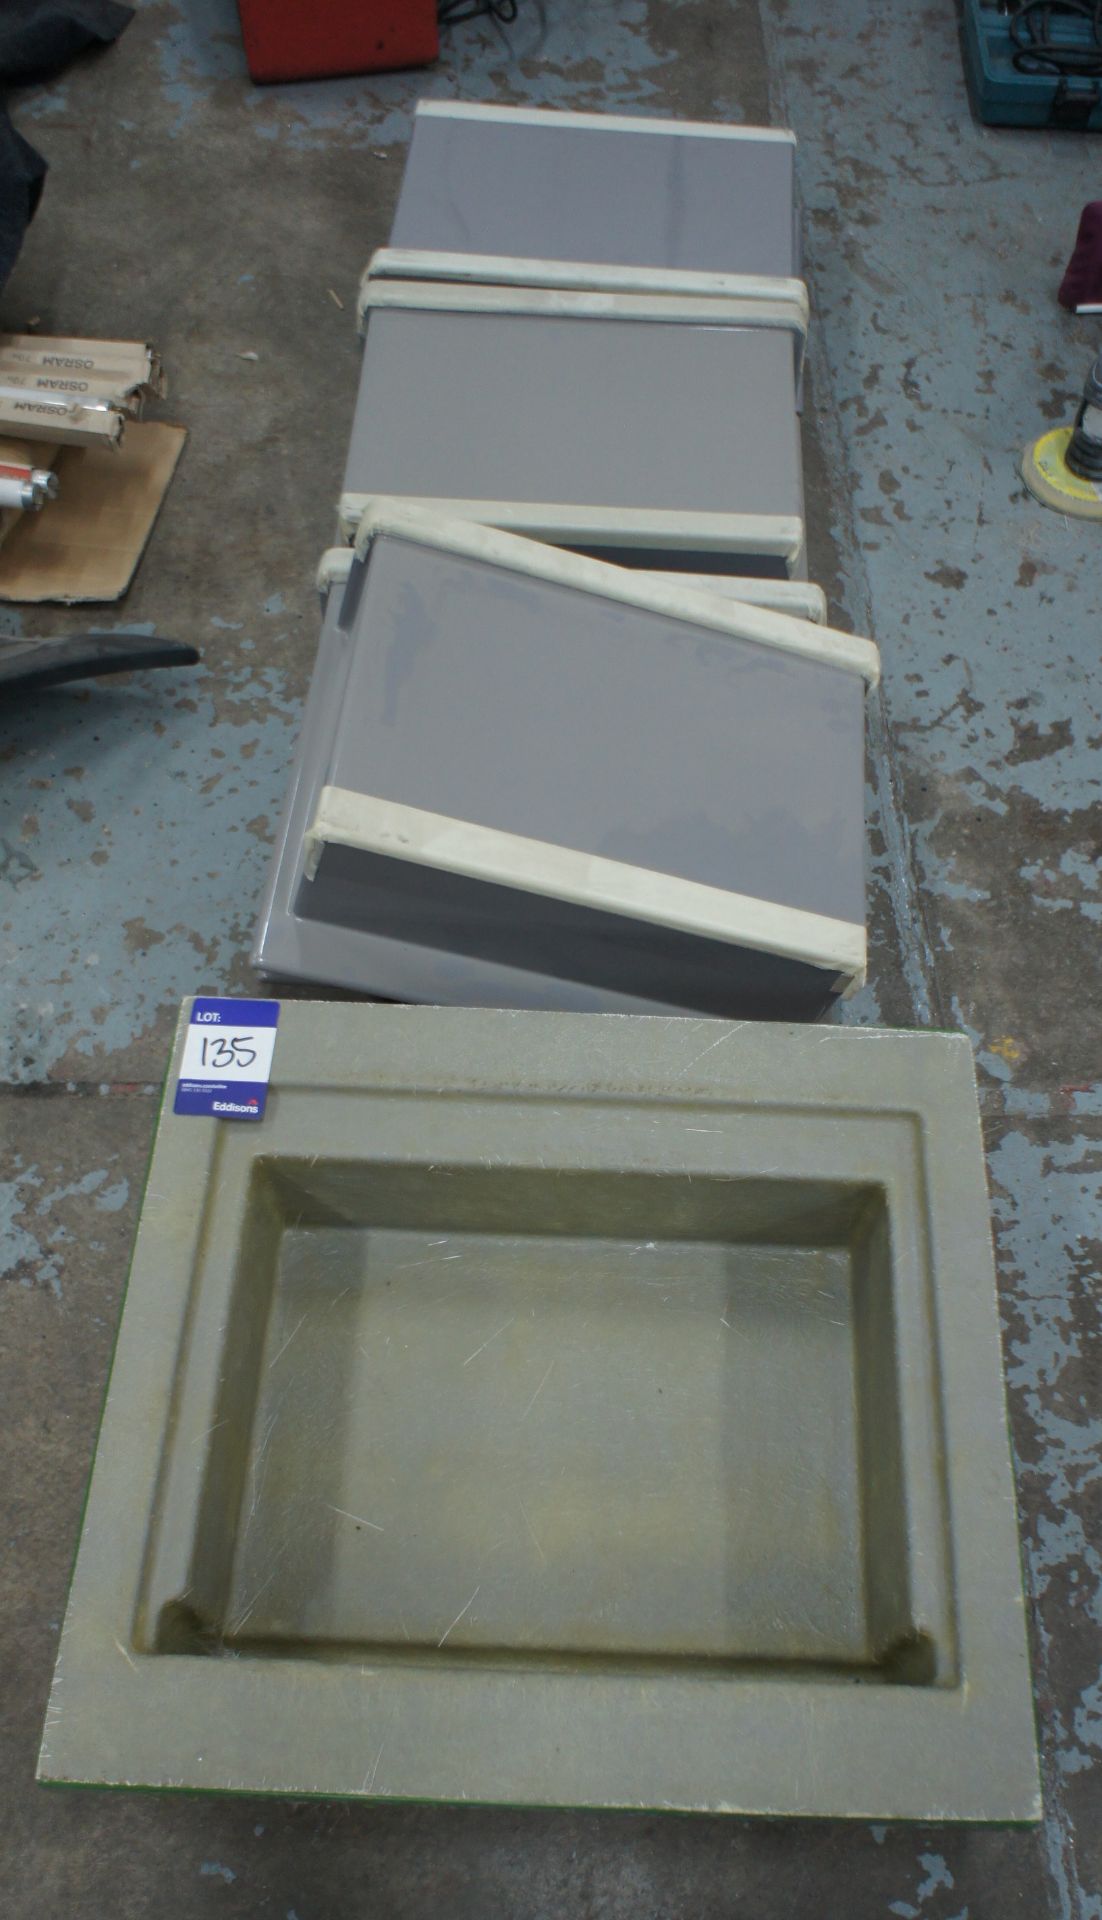 Wheelchair / storage box mould and samples